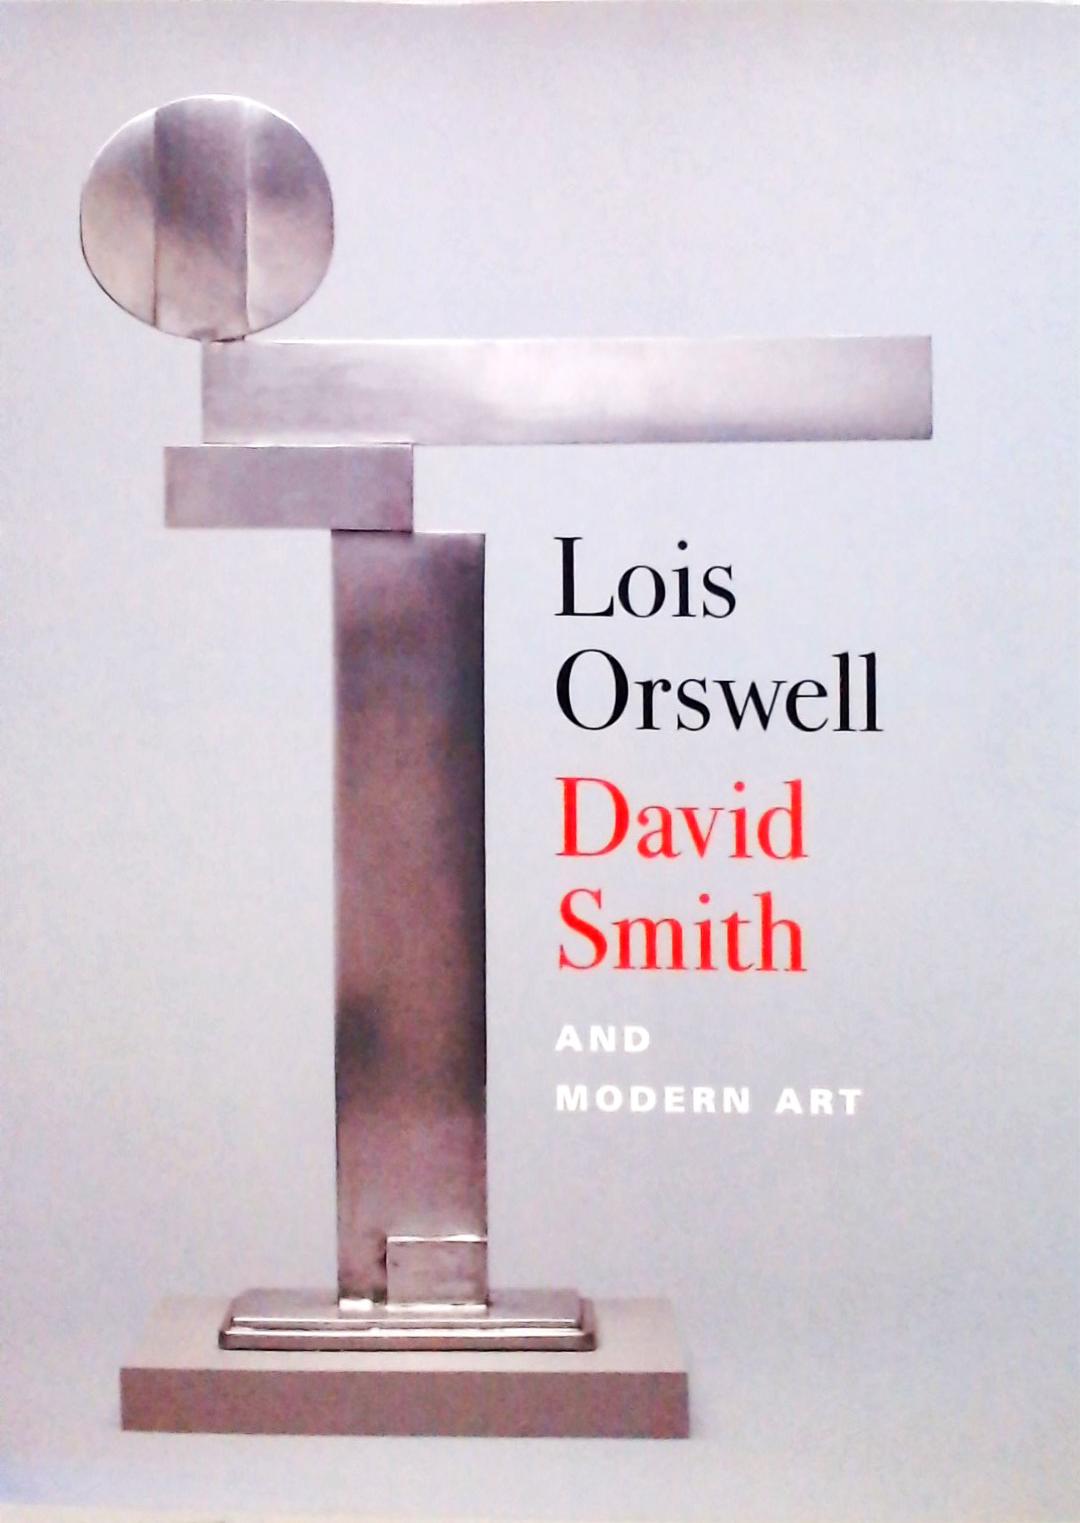 Lois Orswell and David Smith and Modern Art